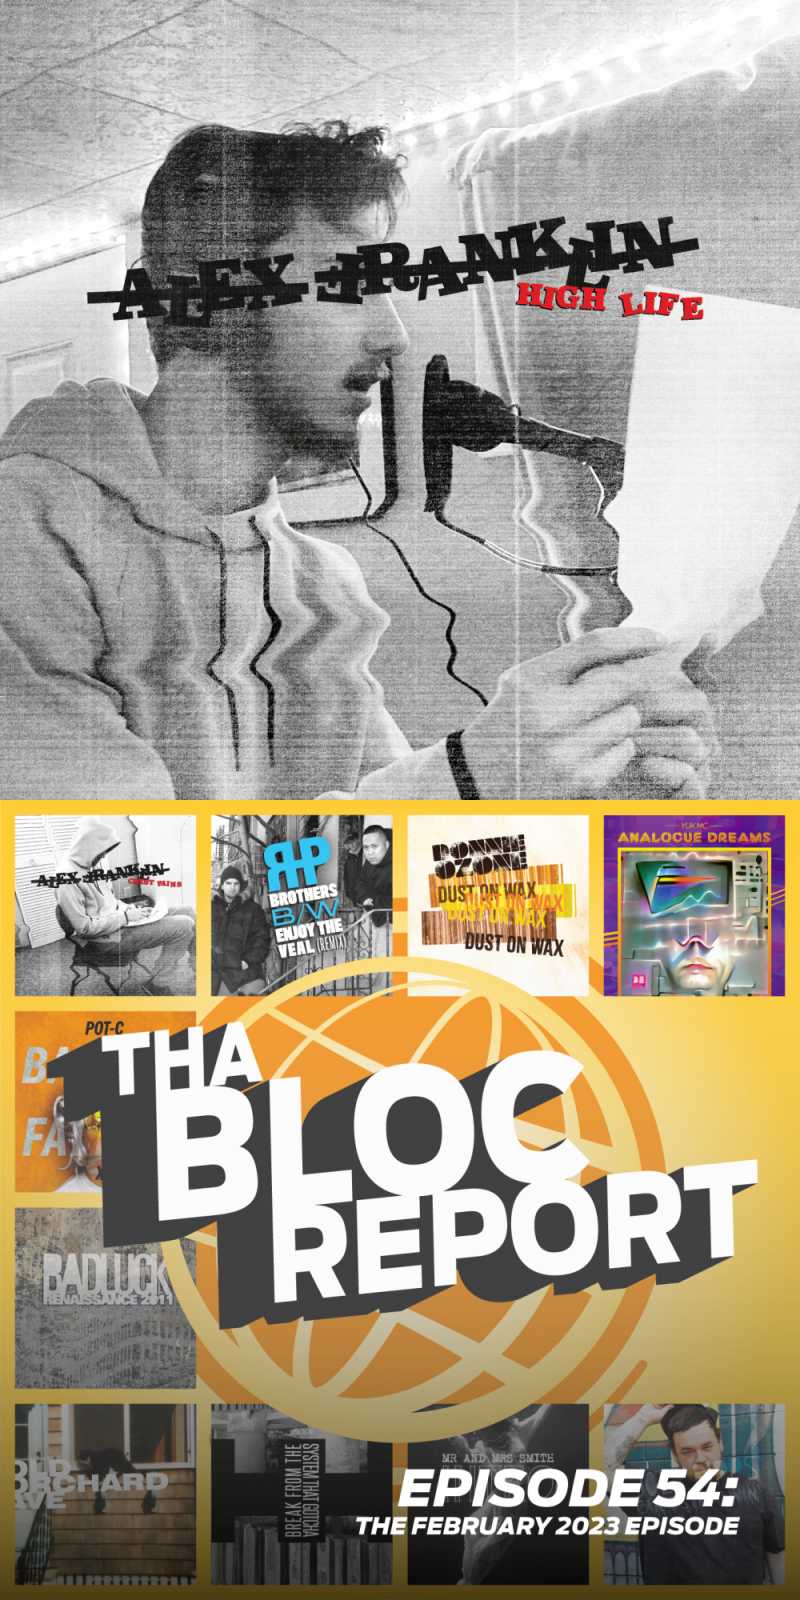 Covers of “High Life” by Alex Franklin and “Tha Bloc Report Episode 54: The February 2023 Episode”